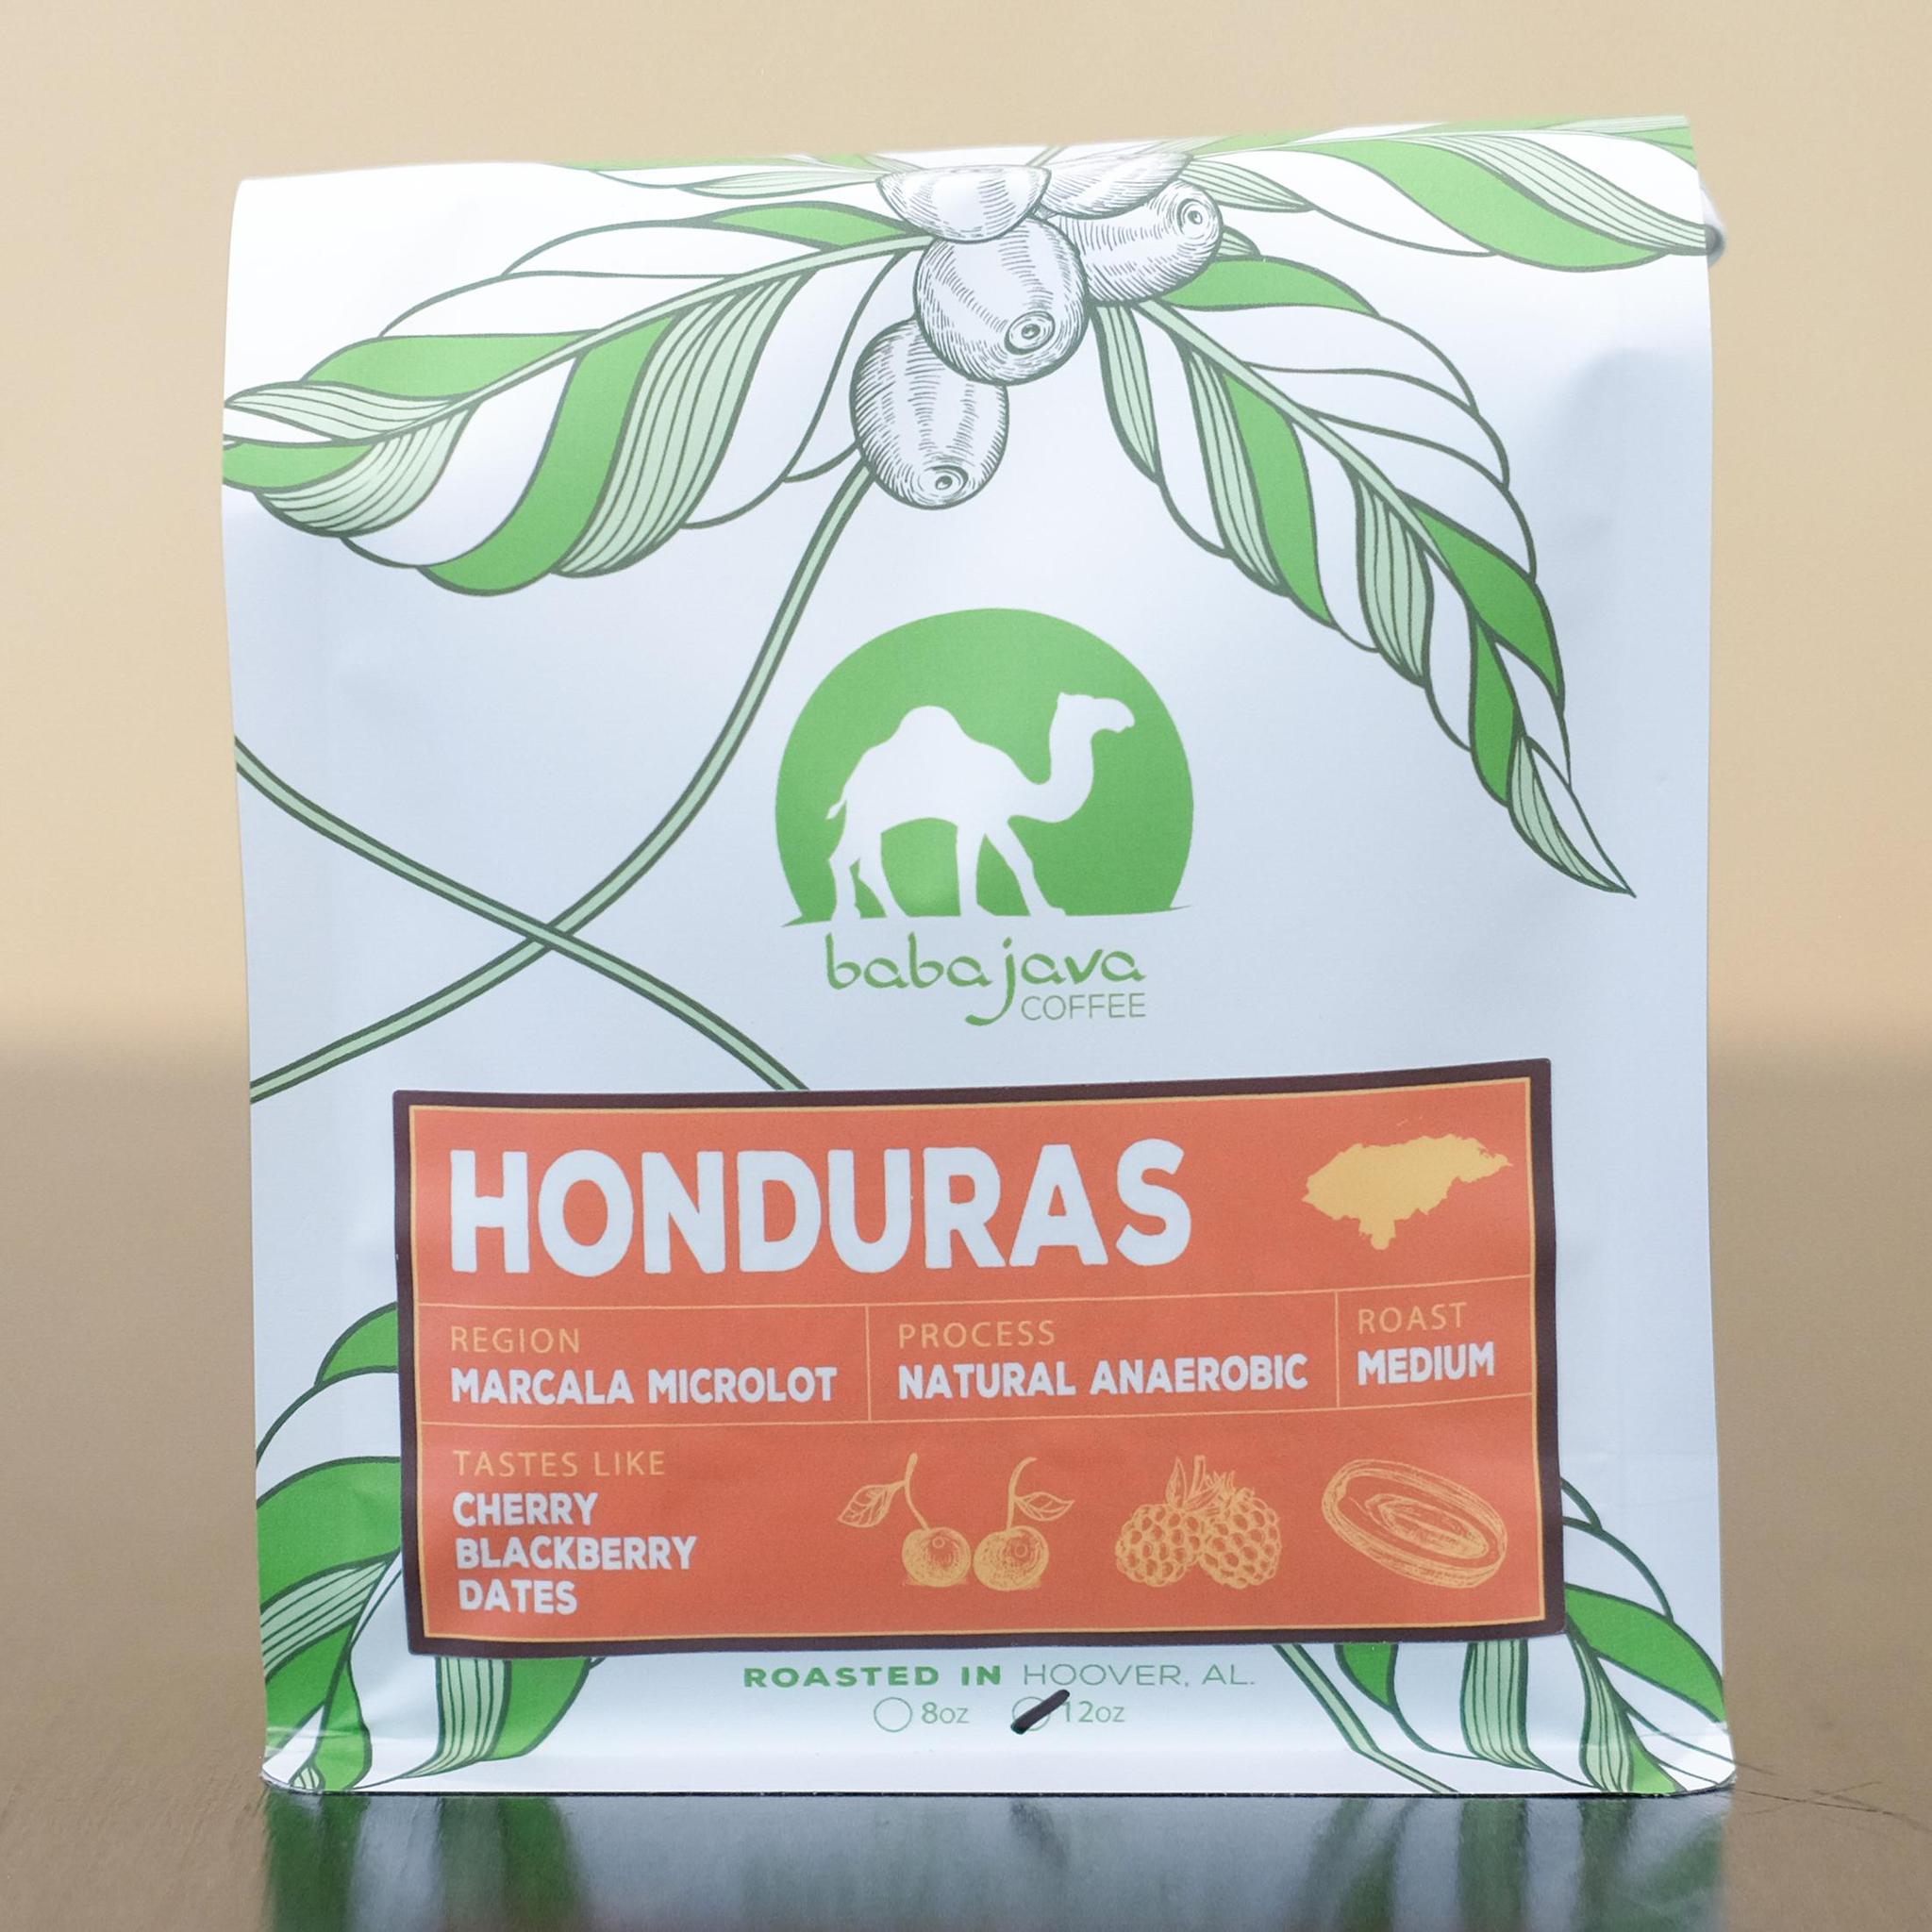 A bag of coffee with an orange label that reads Honduras. The bag has a drawing of a coffee plant and the Baba Java Coffee logo.